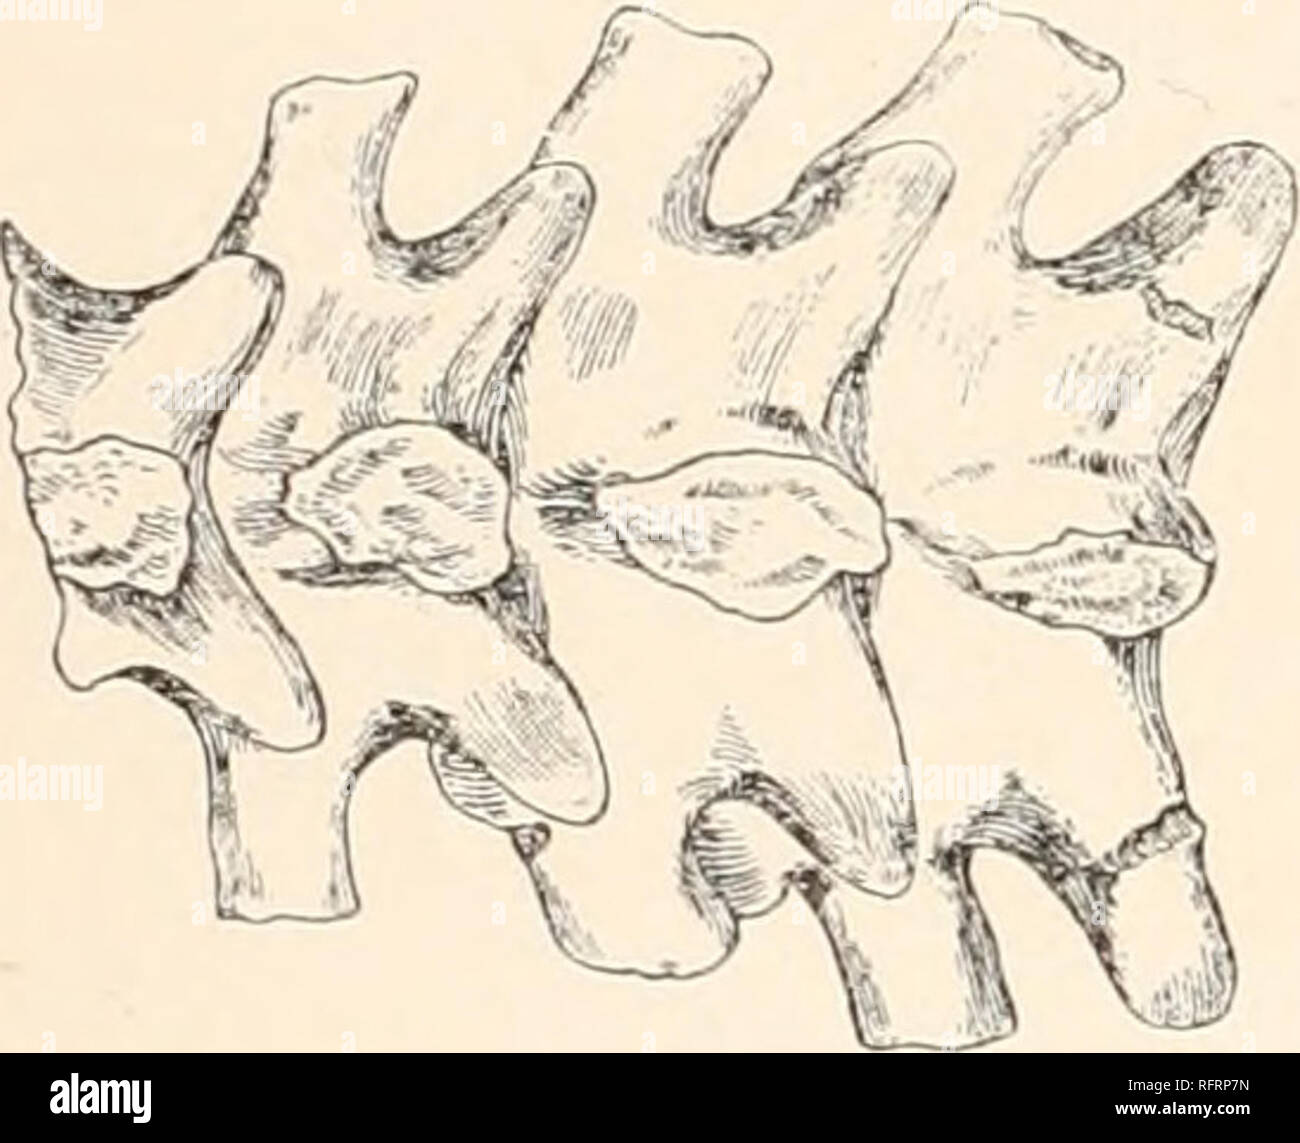 . Carnegie Institution of Washington publication. 3° JERMO-CARBONIFEROUS VERTEBRATES FROM NEW MEXICO. The third vertebra * has lost the neural spine, but judging from the base the spine was broadly diamond-shaped in section with the anterior and posterior edges somewhat extended as in the succeeding vertebras of the presacral series. The neural arch is slightly convex, beginning to assume the form of the neural arch in all the Cotylosauria, but is still much narrower than those of the dorsal series. The anterior zygapophyses are injured, but were evidently of good size. The neural canal is, as Stock Photo